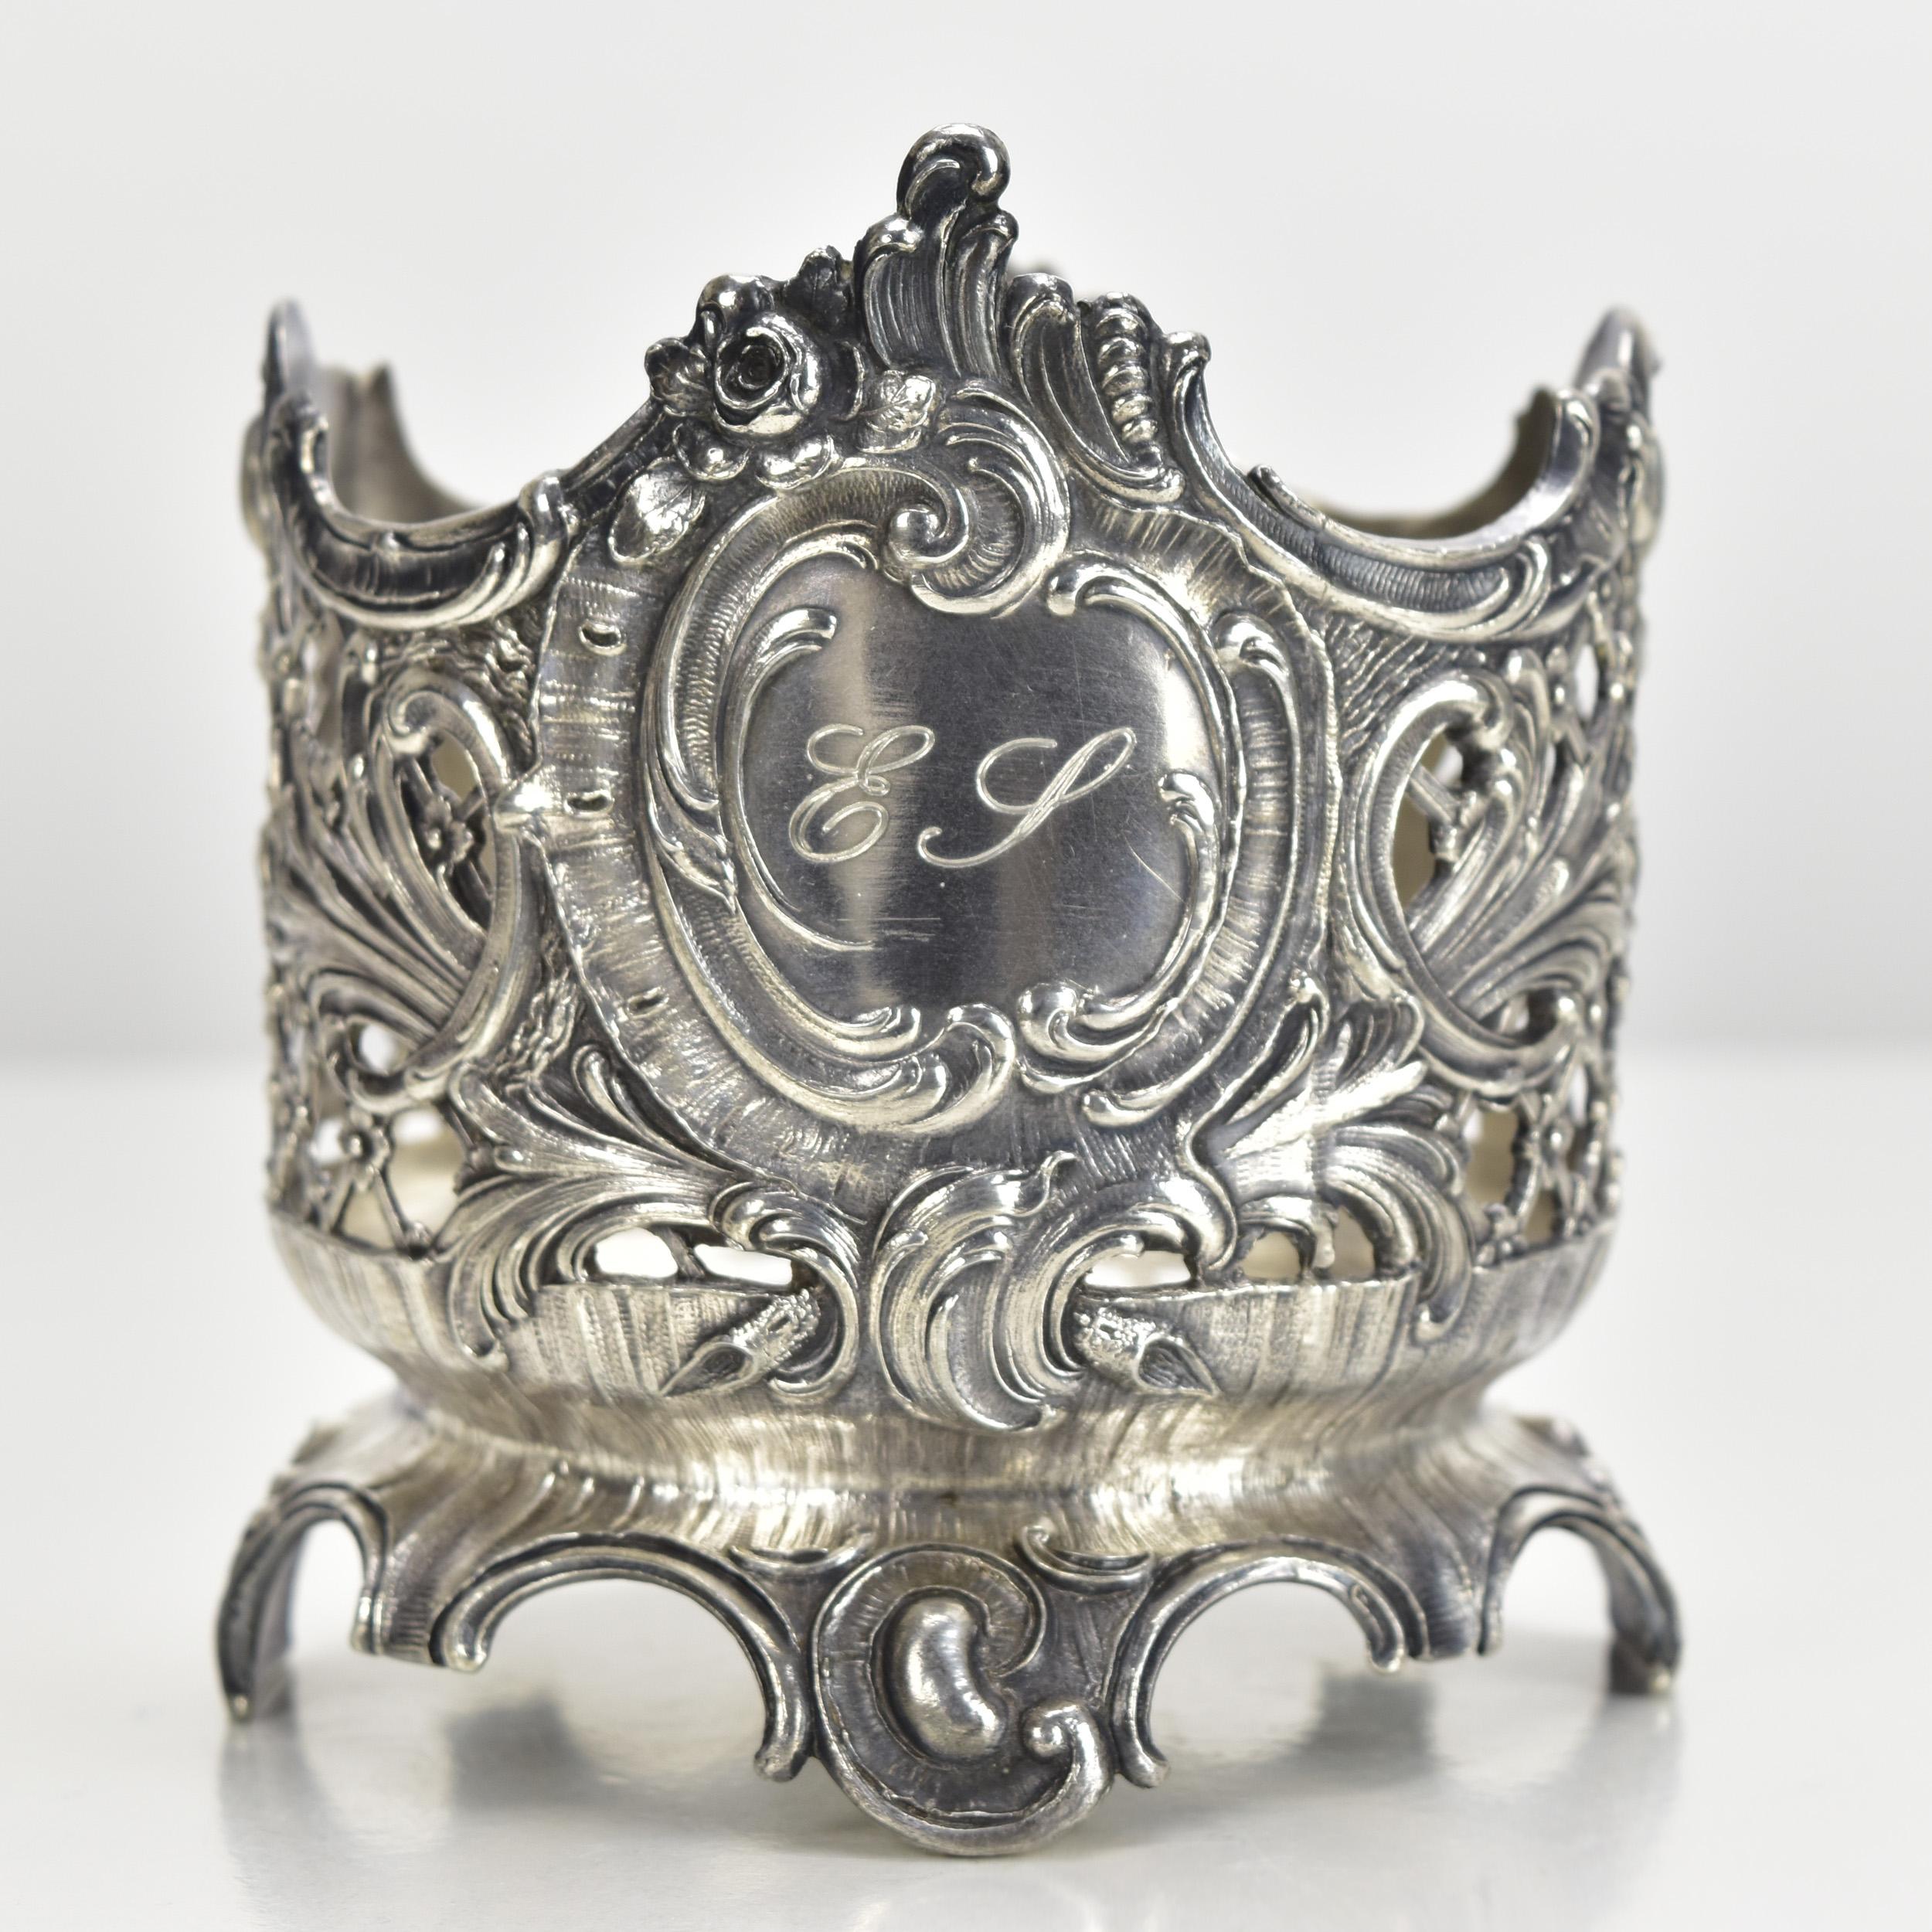 A beautiful Renaissance Revival wine or spirits bottle holder or coaster made of patinated silverplated pewter called Britannia Metall. This beautiful bottle stand was made by WMF dating to the Art Nouveau period around 1900.

